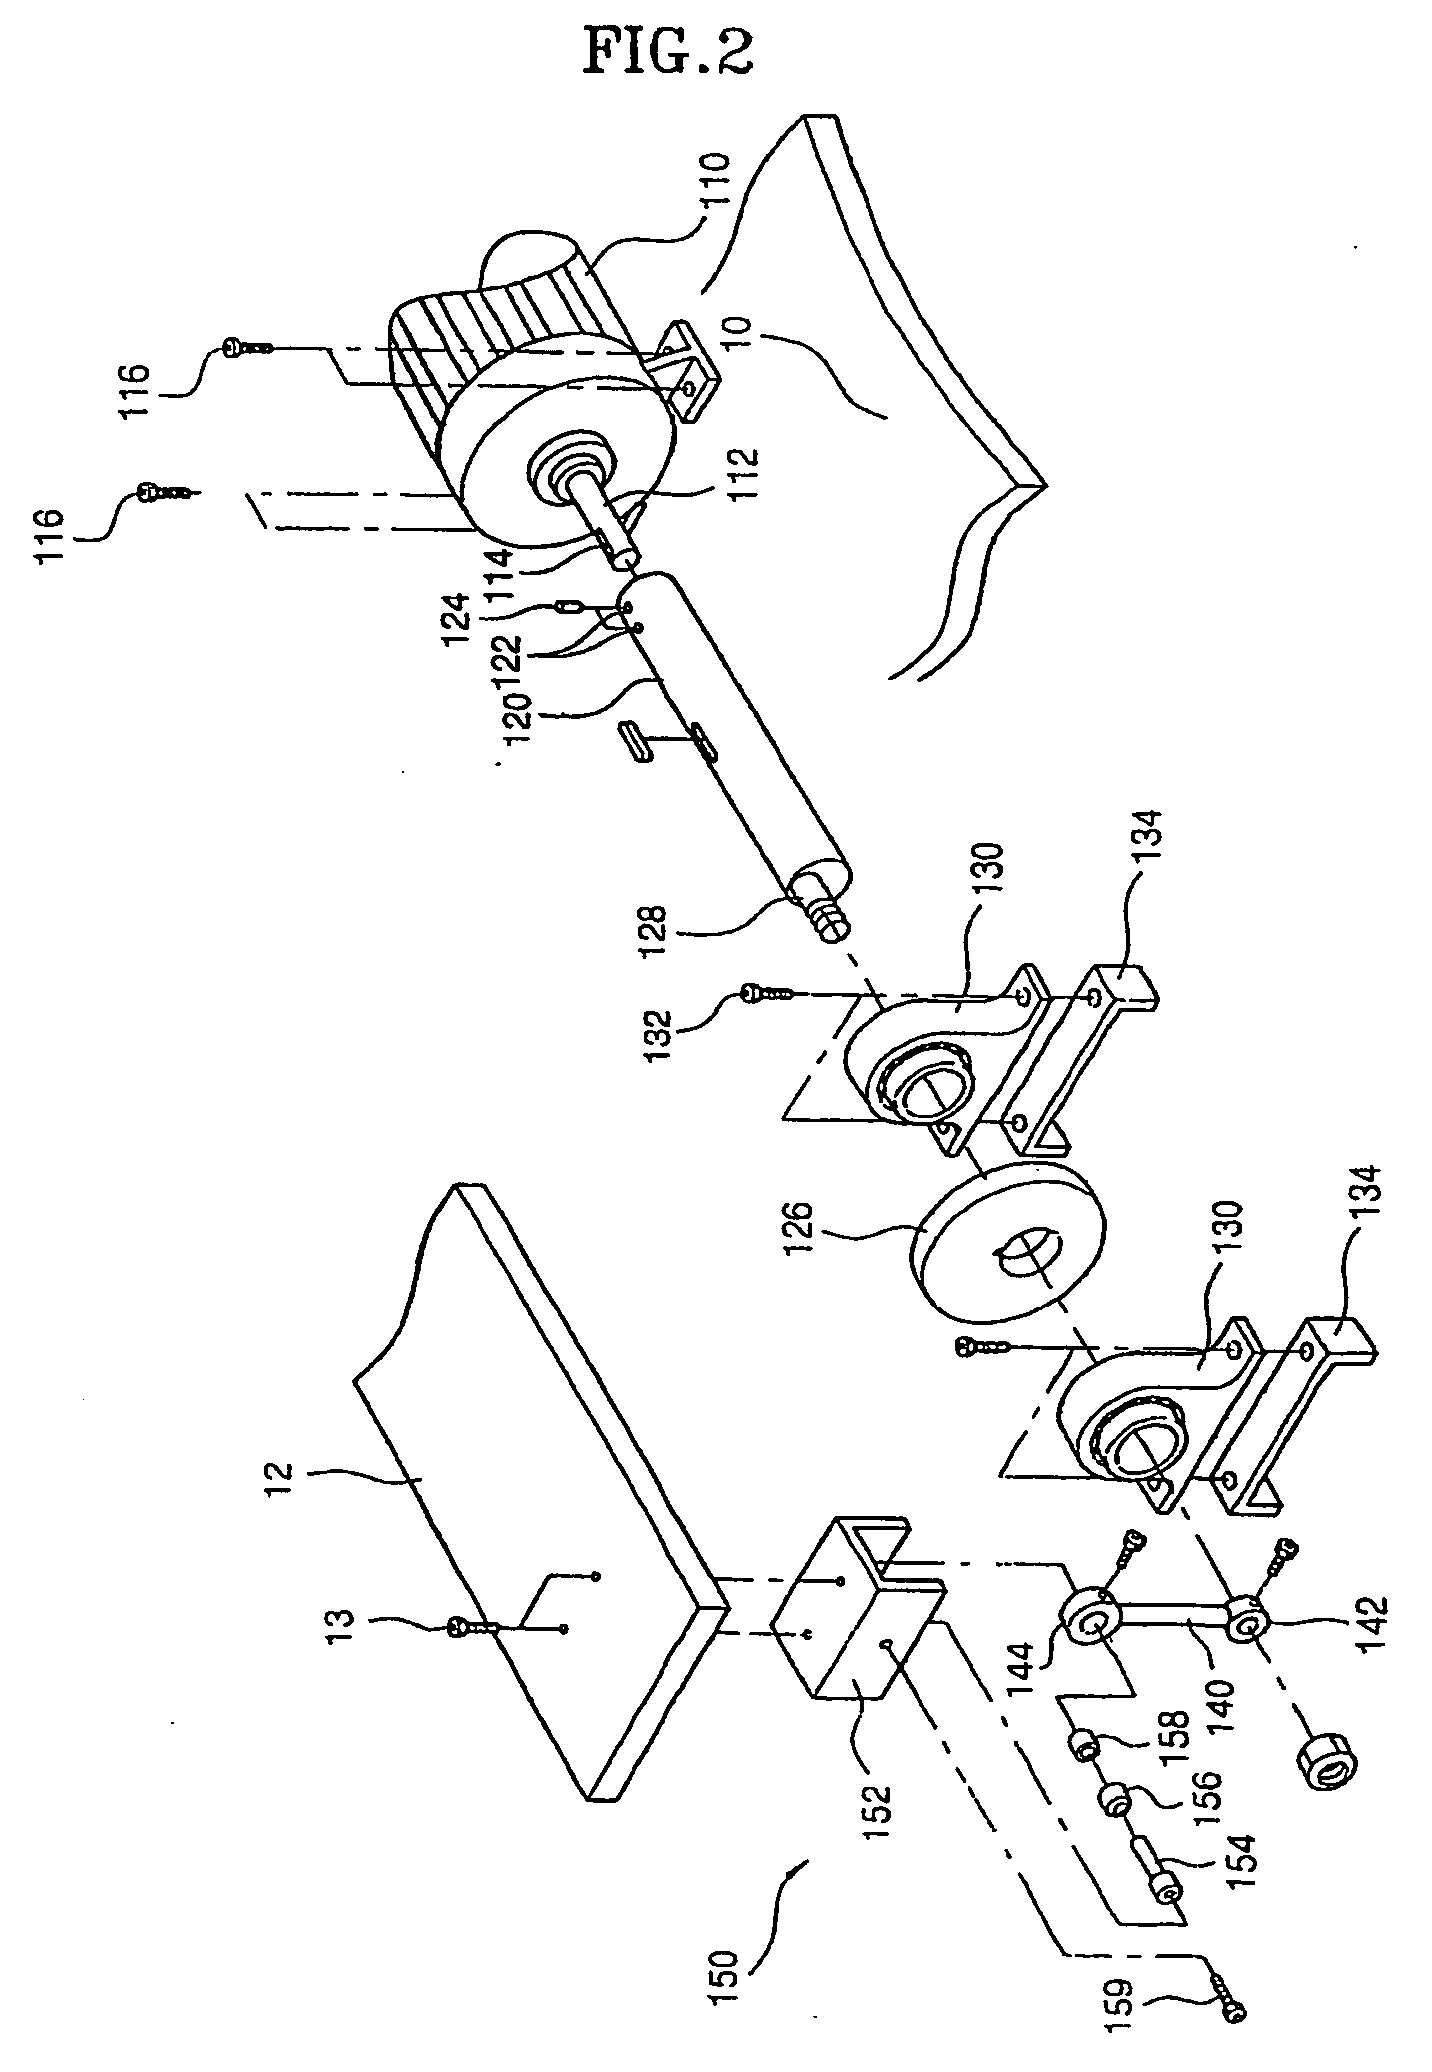 Device for promoting decomposition of body fat and enhancing muscular strength